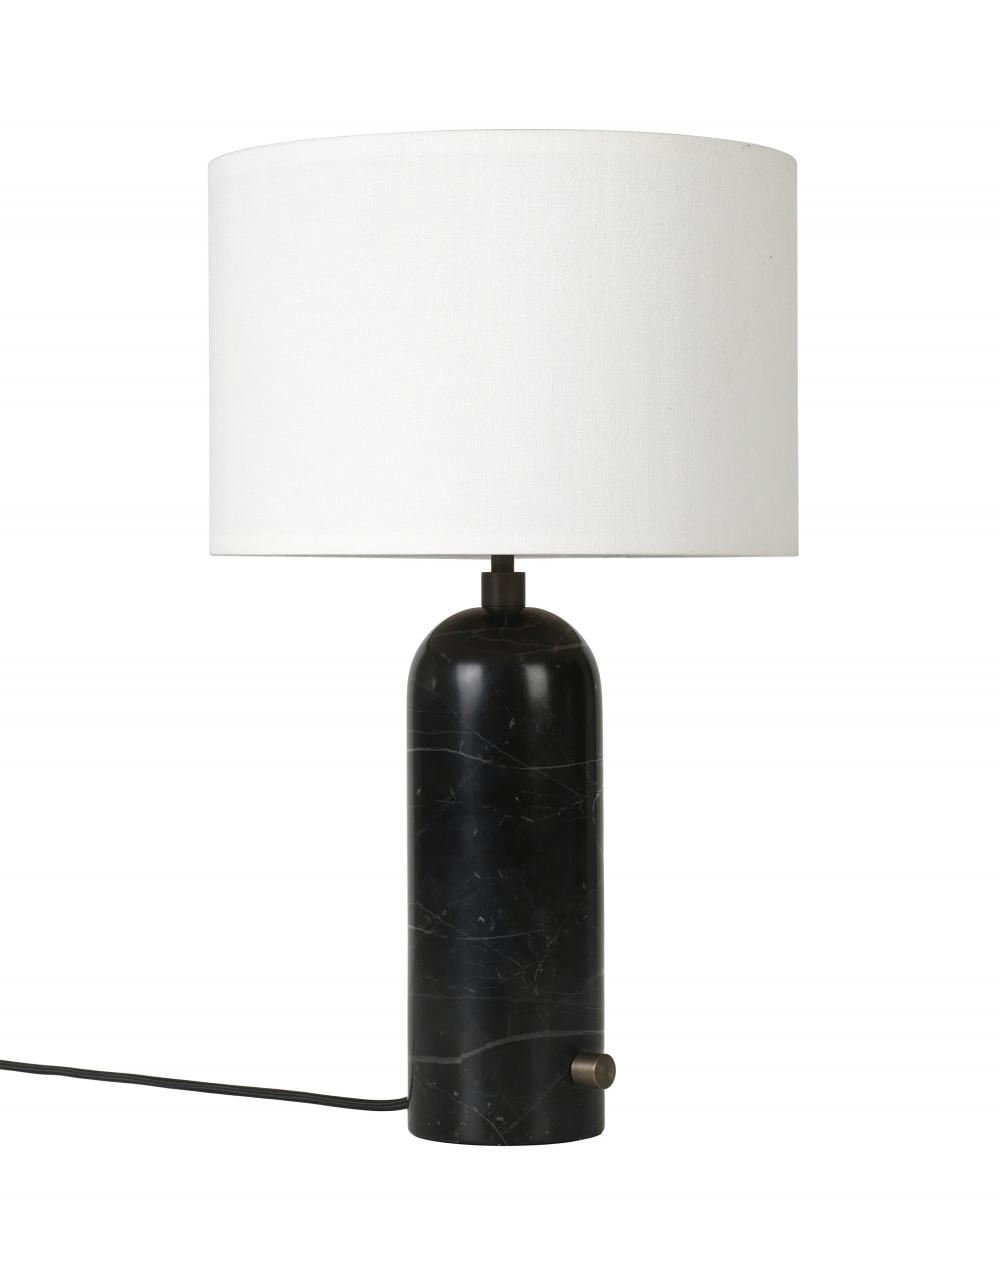 Gravity Table Lamp Small Black Marble White Shade